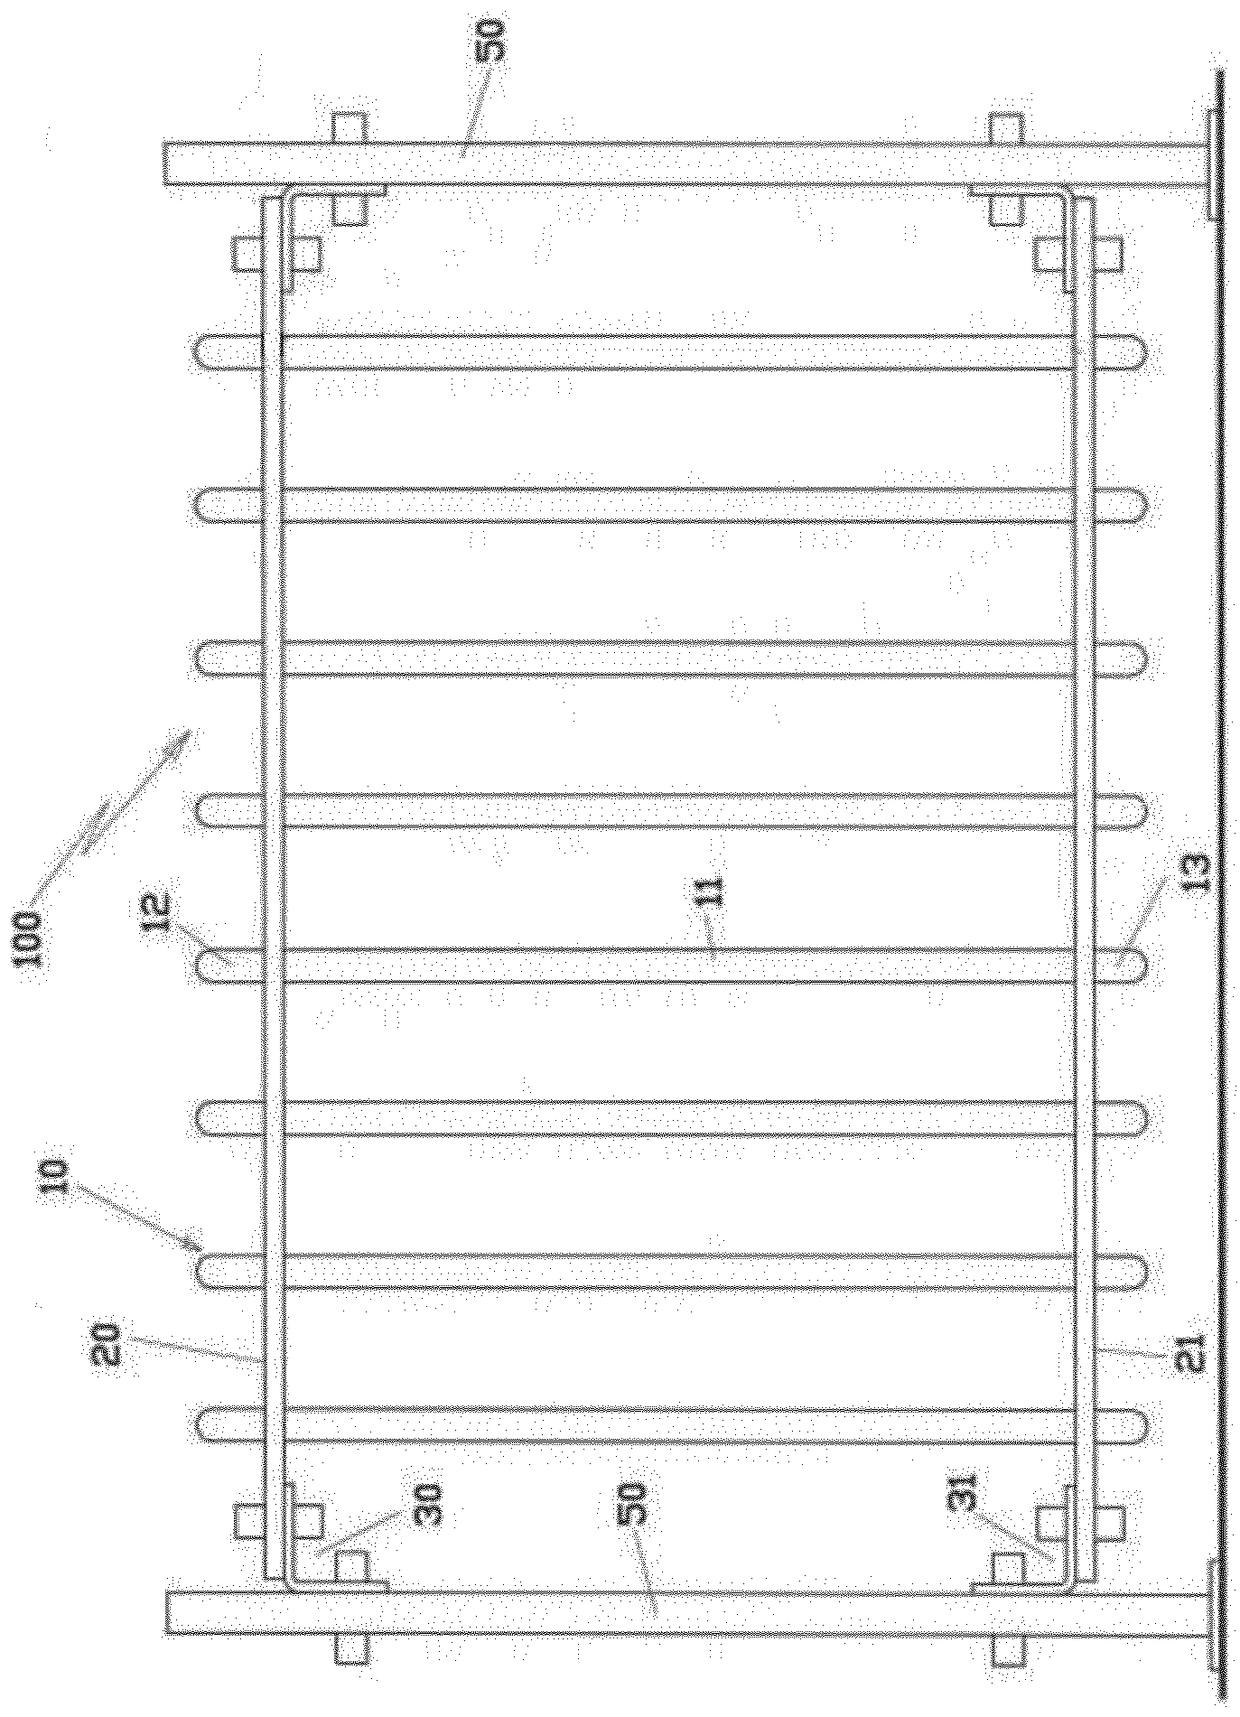 Structure for making fences, grates, guardrails and other similar carpentry products